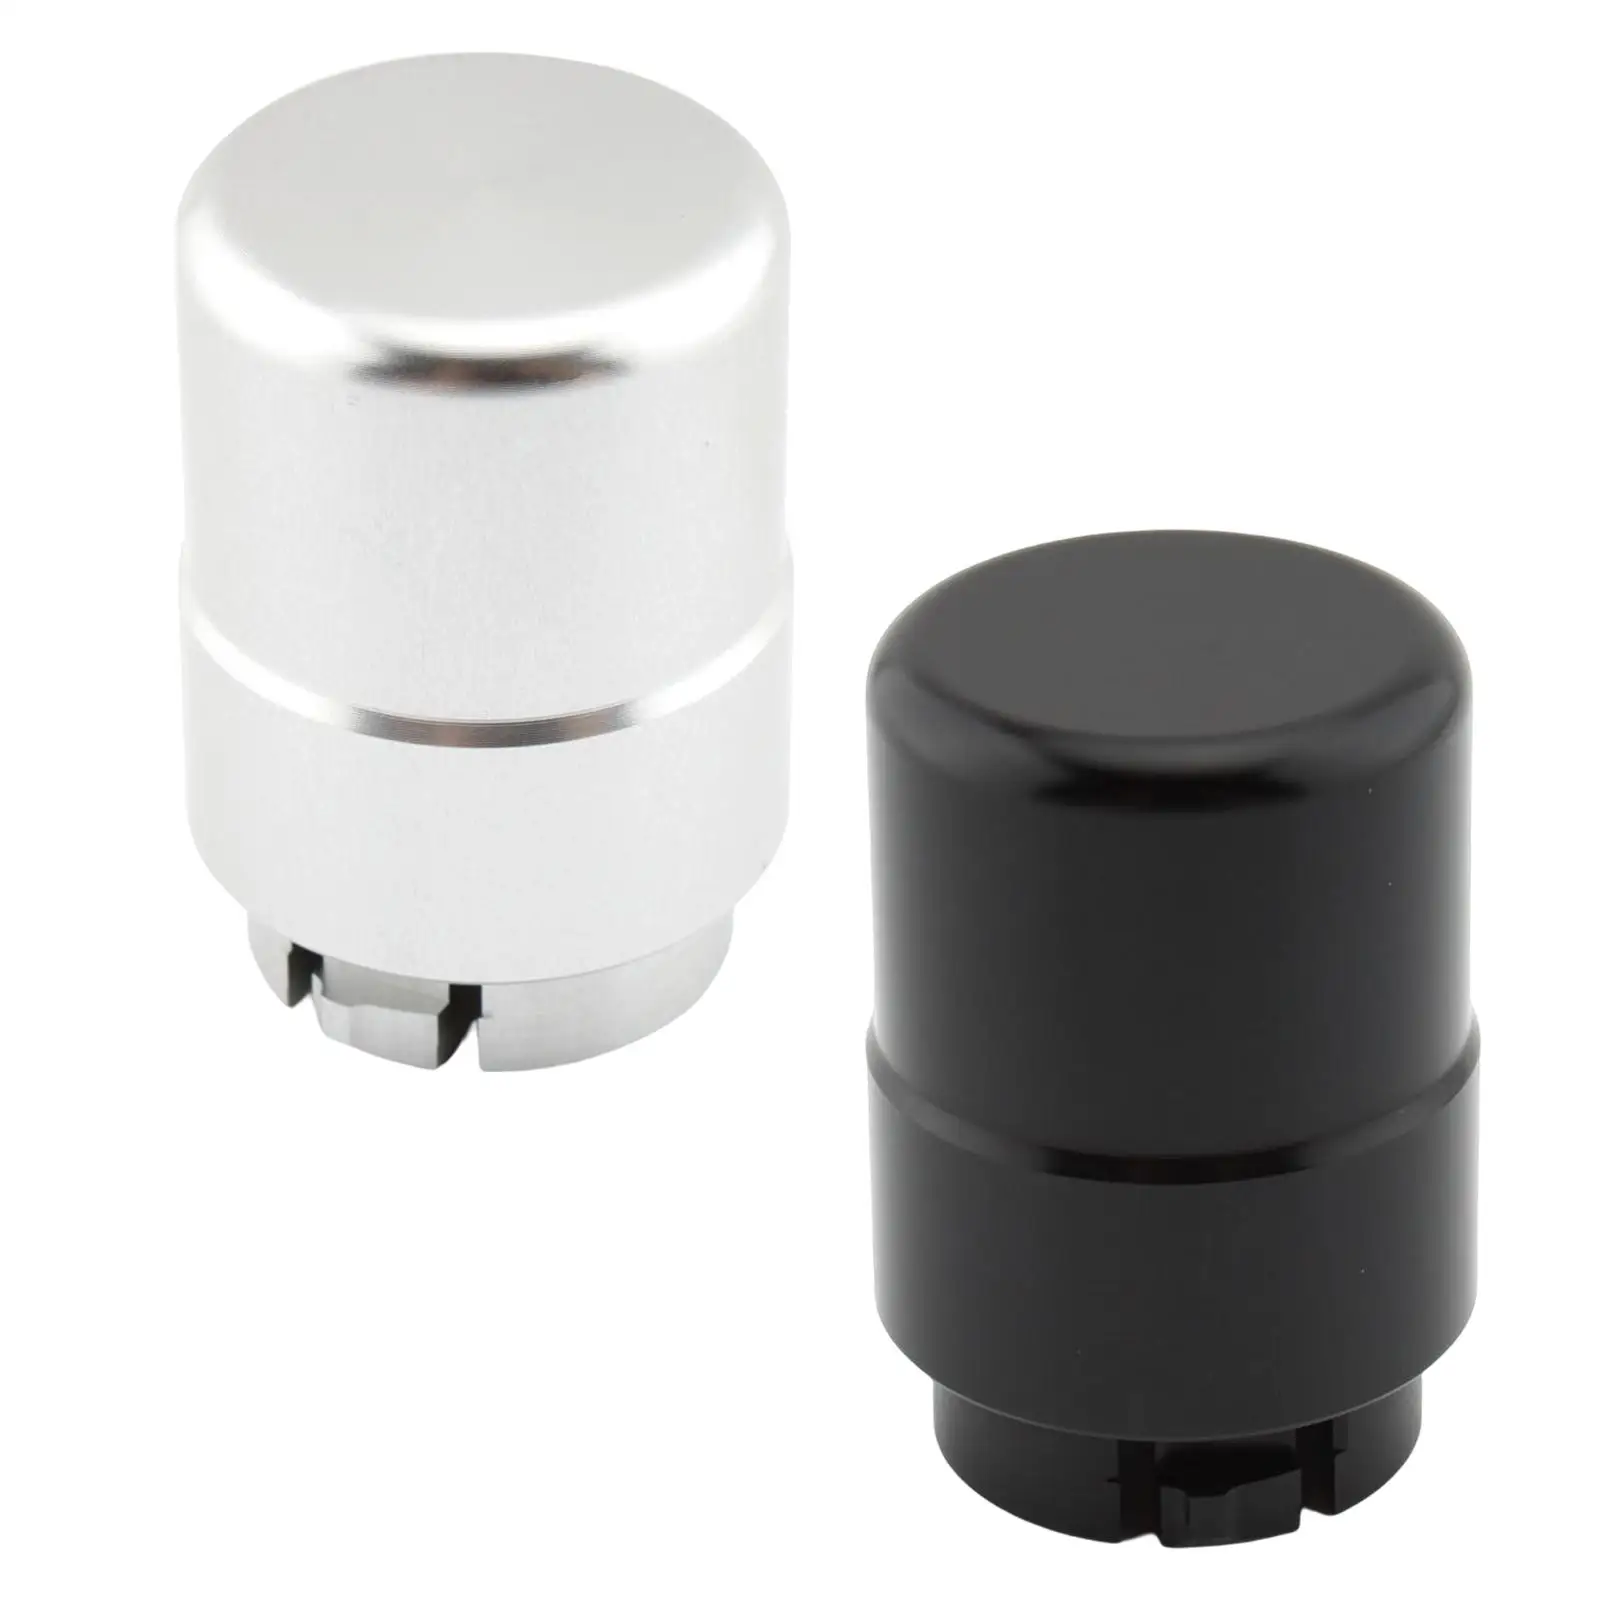 Aluminum Alloy Transmission Shifter Button Replaces Easy Installation Durable Accessory